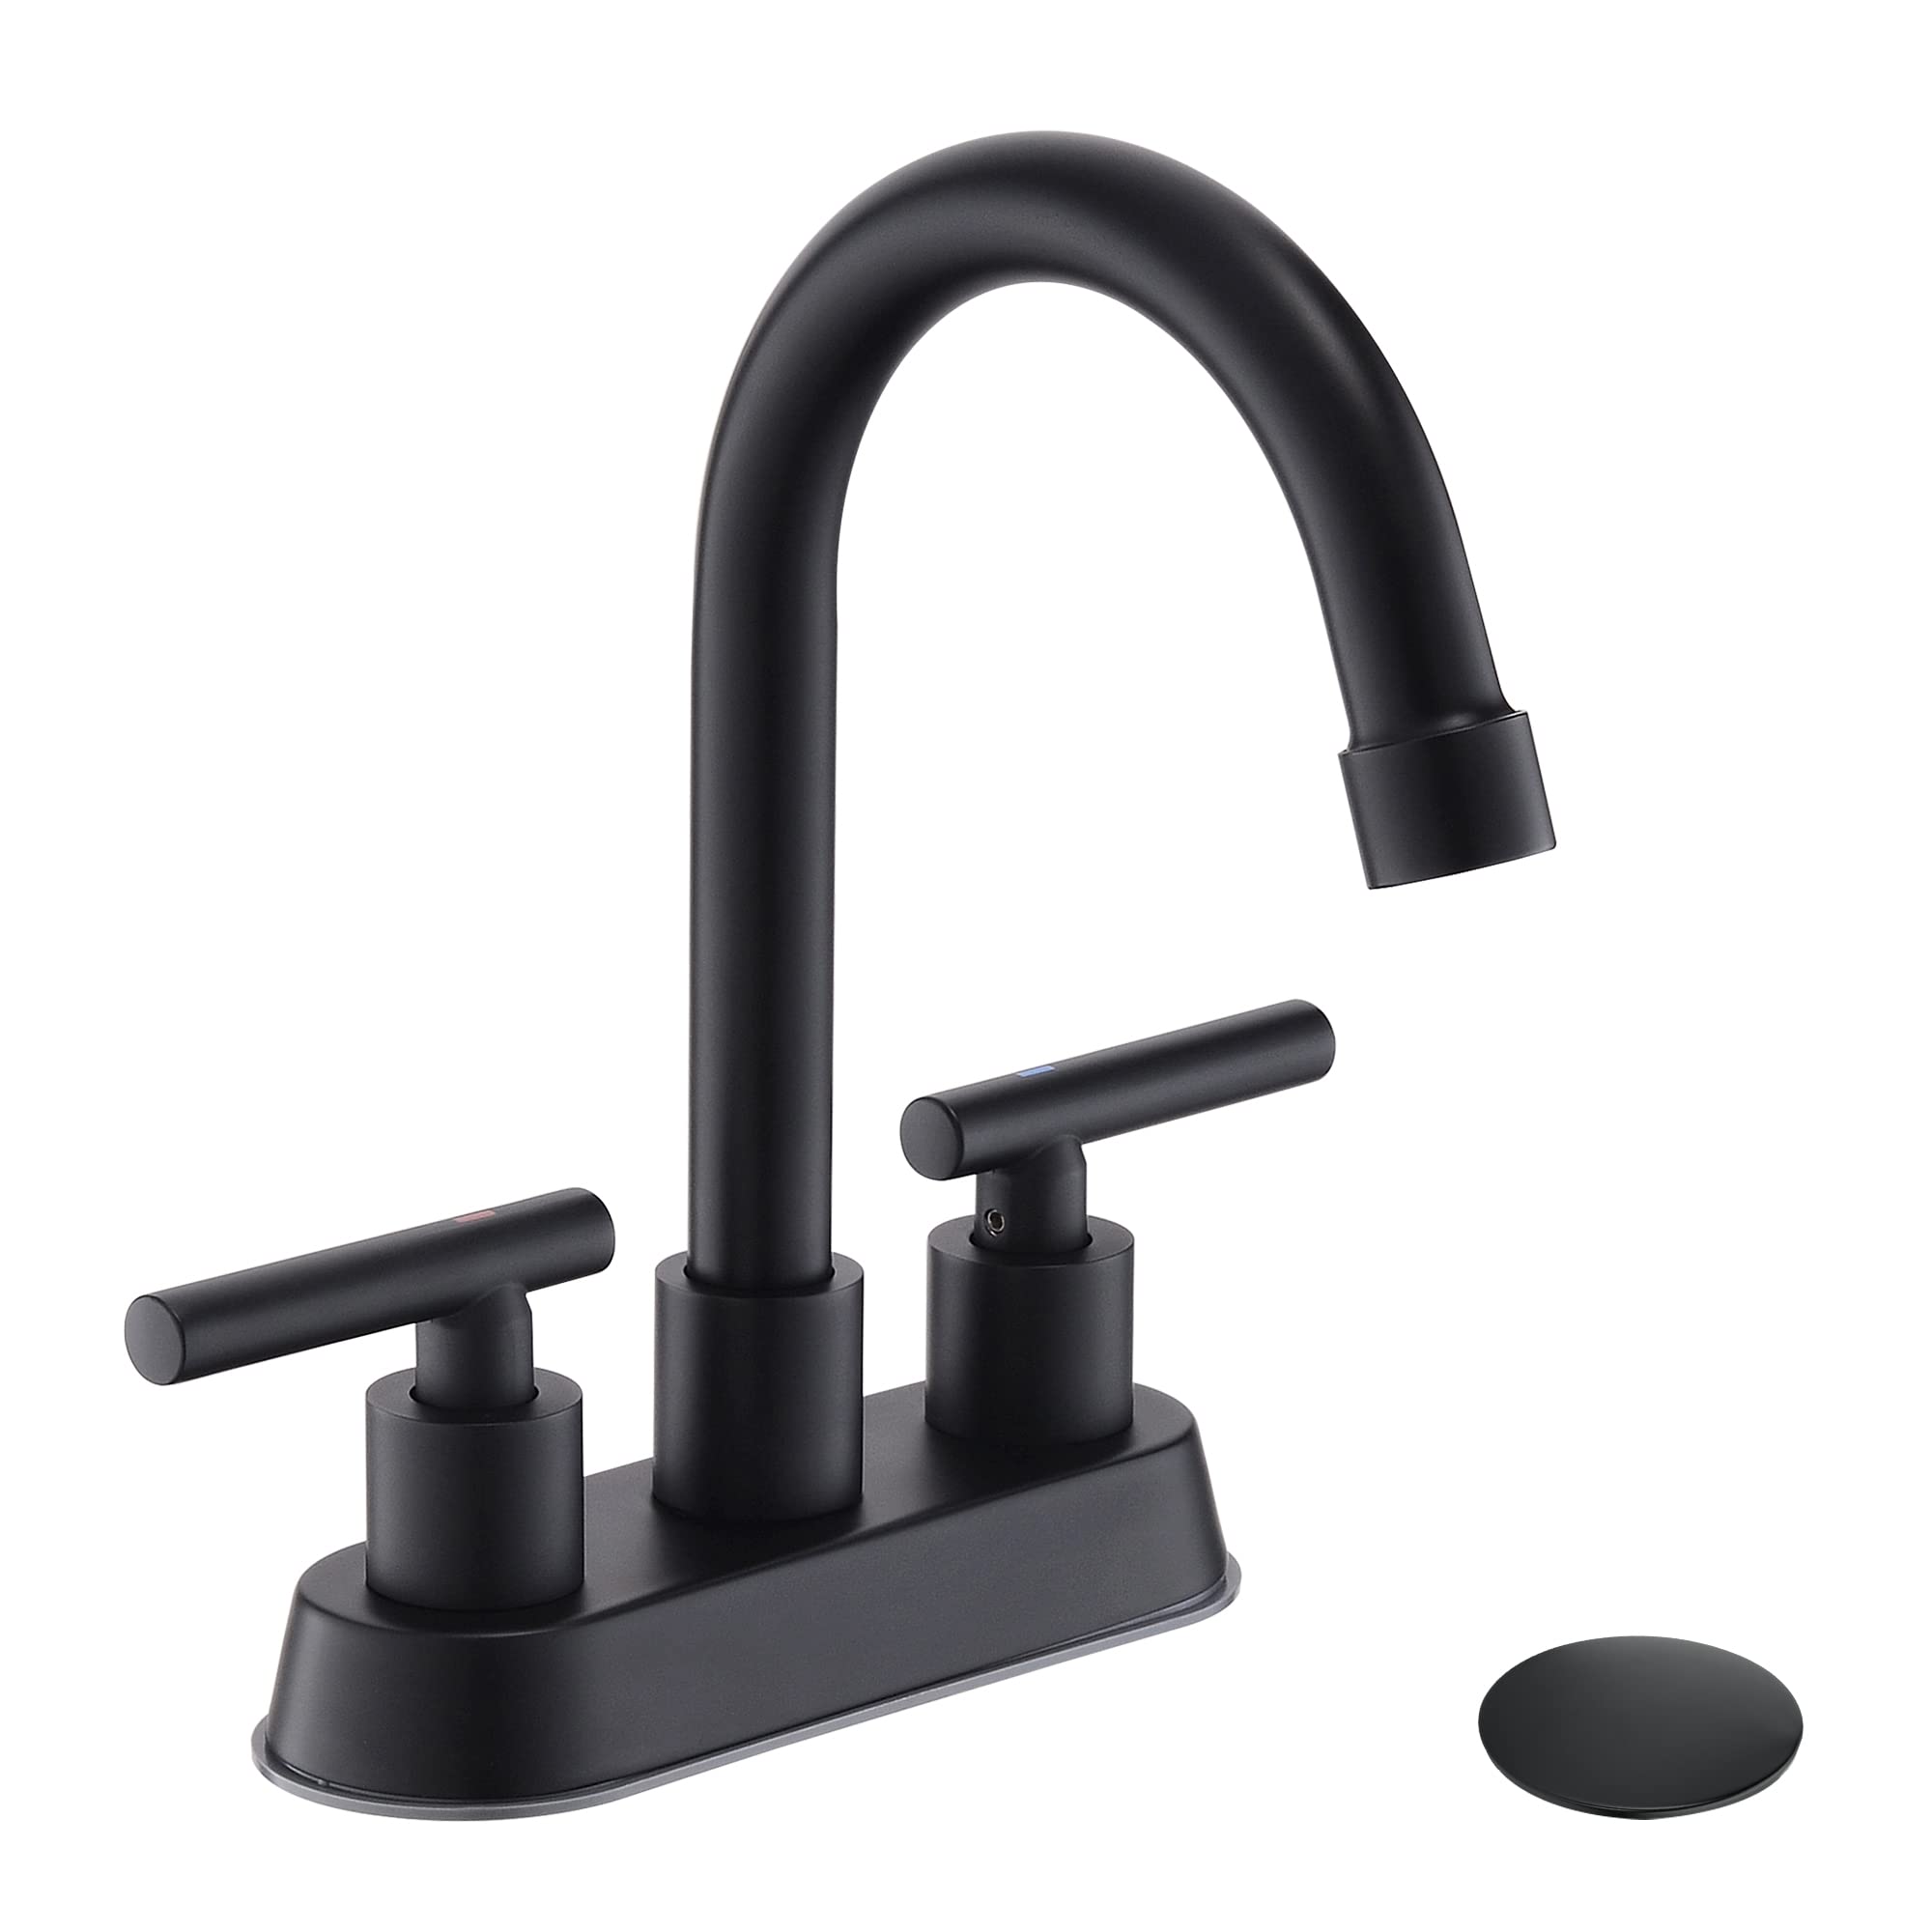 YardMonet Black Bathroom Faucets, 2 Handle Bathroom Sink Faucet, 4-Inch Centerset Bathroom Sink Faucet with Pop Up Drain and Water Supply Lines Bathroom Faucet Black